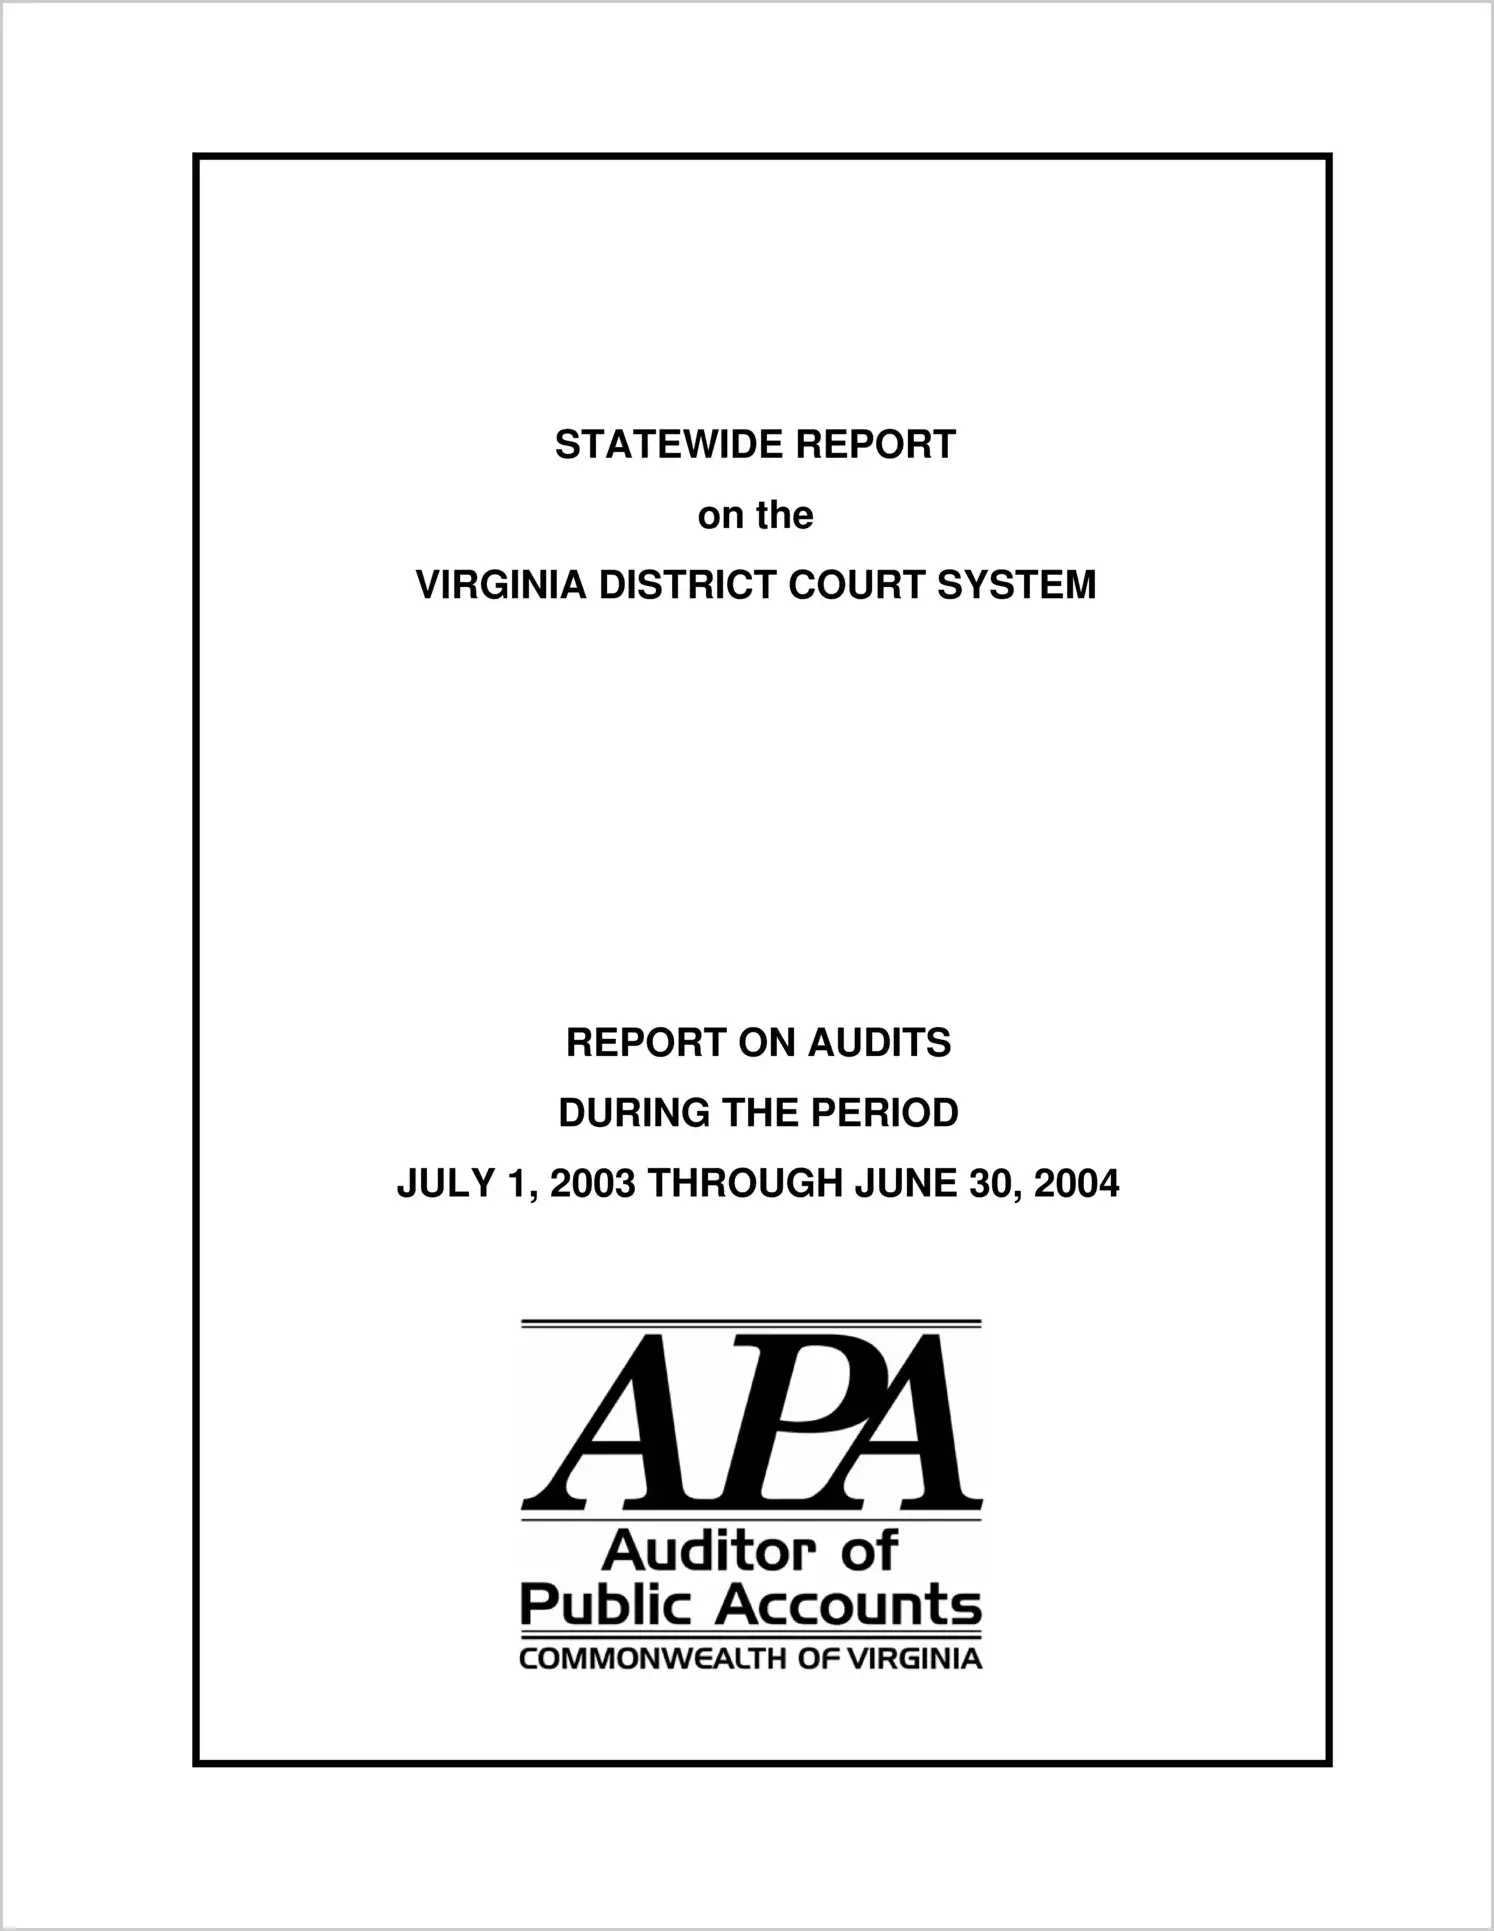 Virginia District Court System for the fiscal periods through June 30, 2004